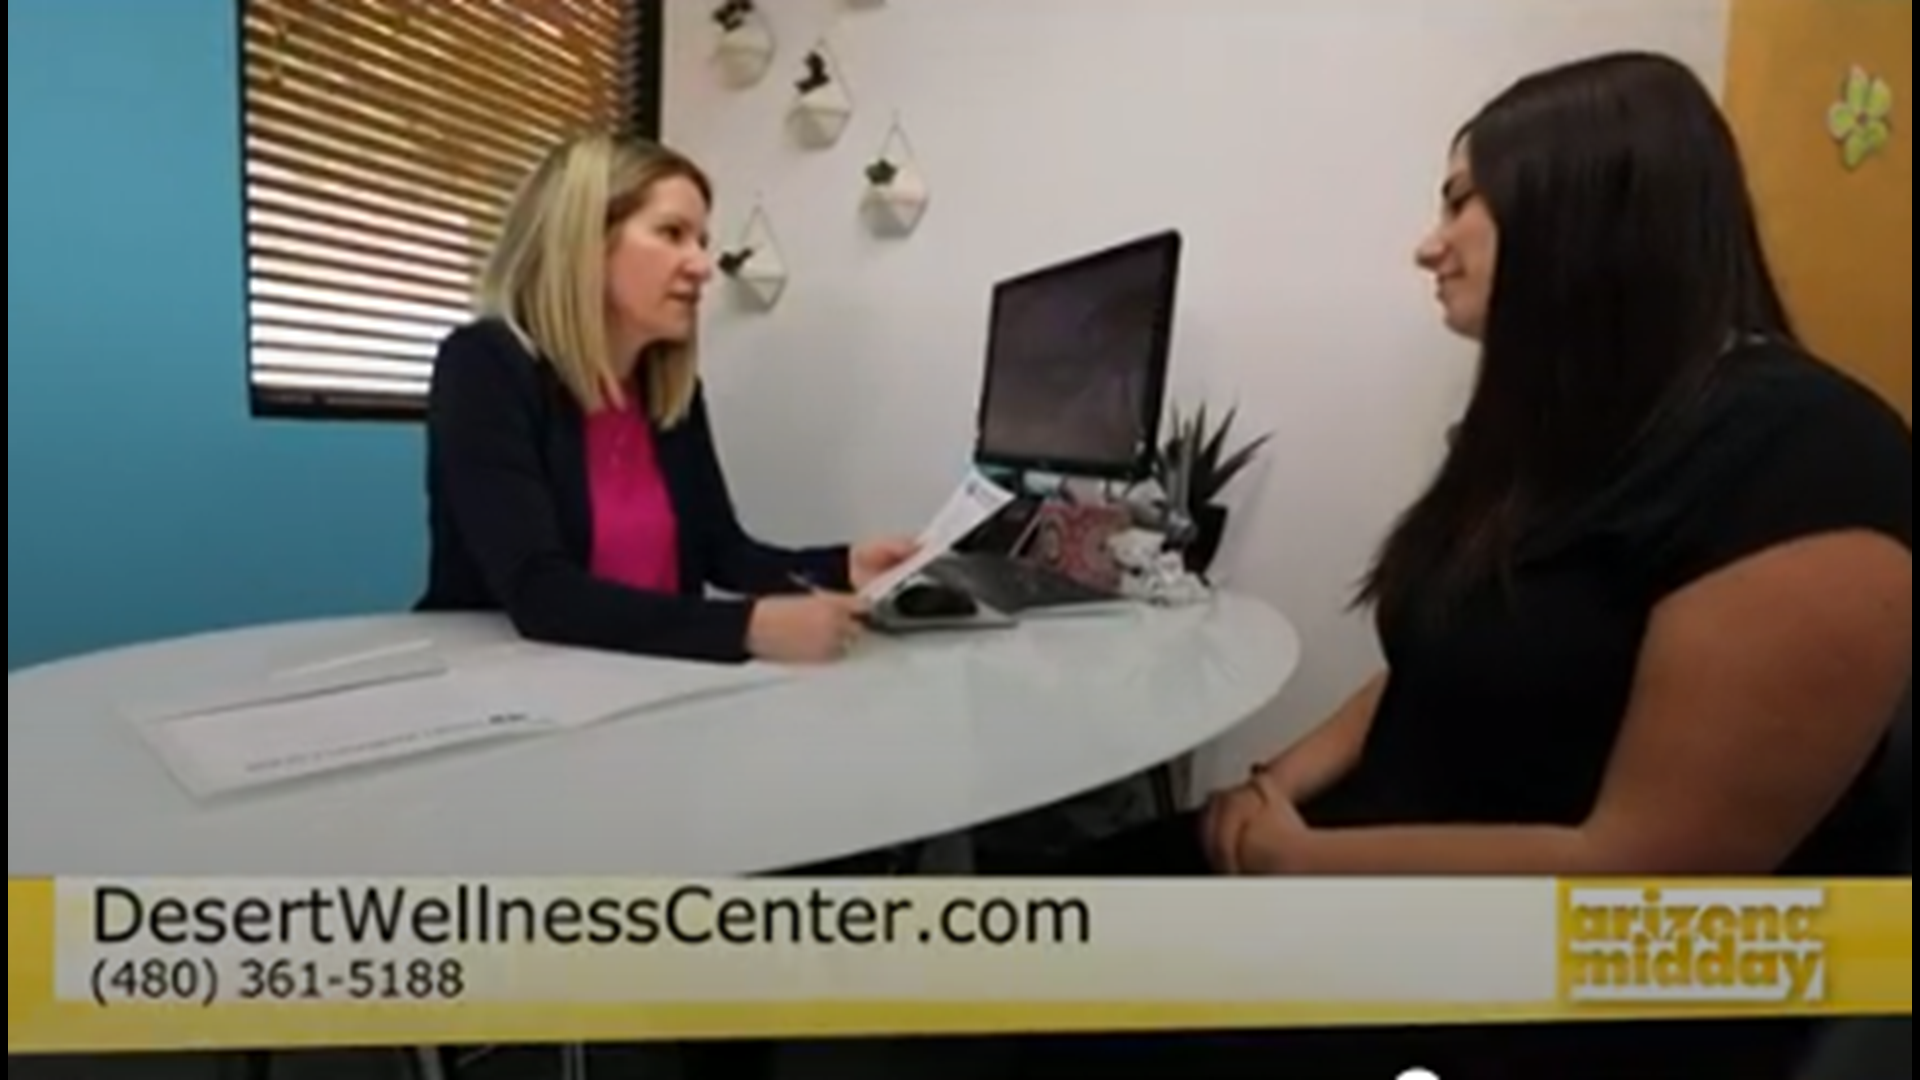 Dr. Kris Wallace, Naturopathic Physician from Desert Wellness tells us how she helps patients feel and look themselves again.